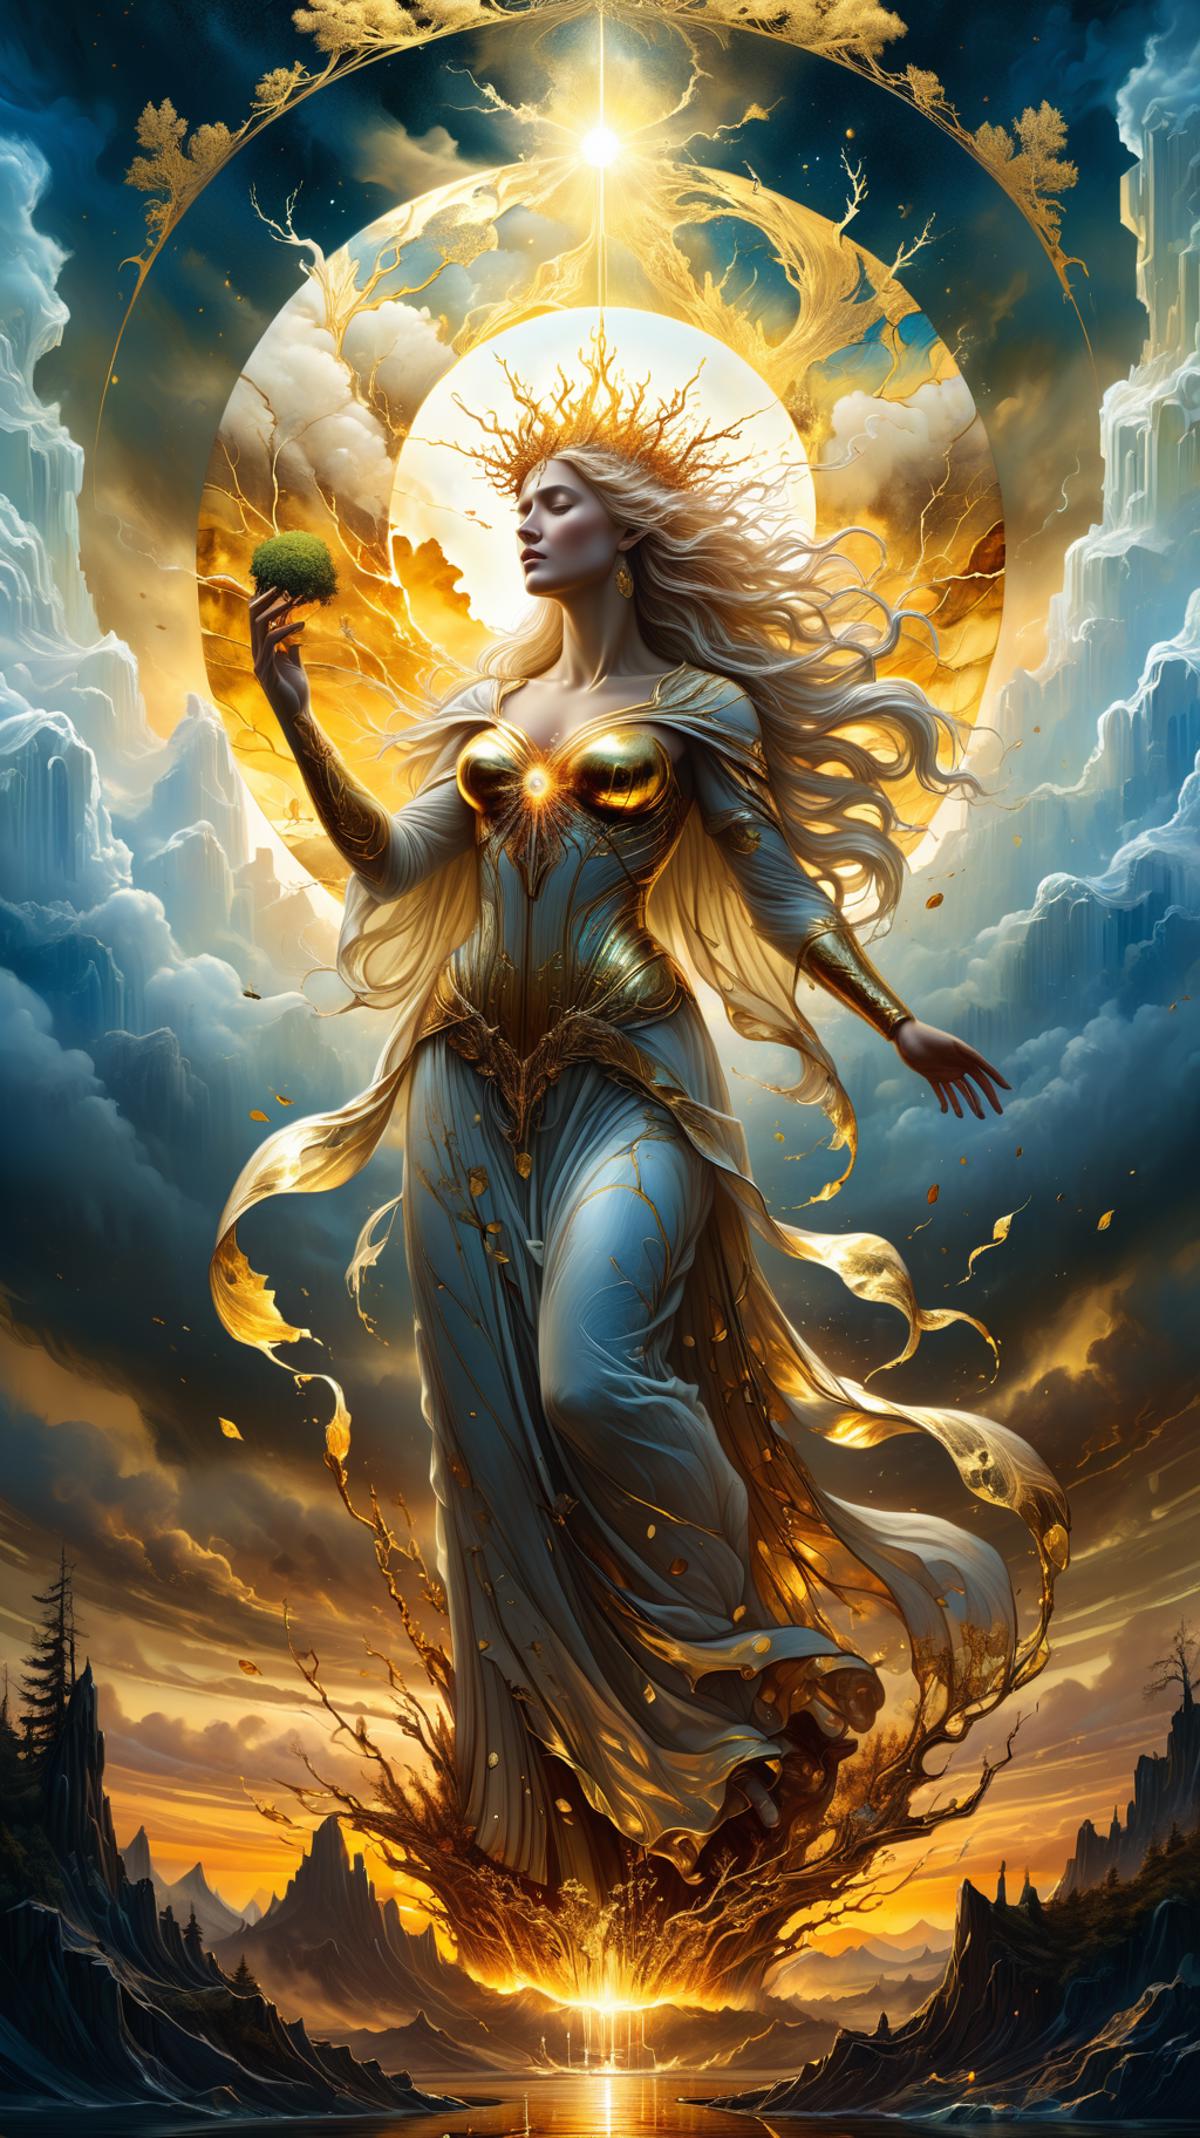 A woman with long blonde hair holding a green apple is standing in front of a sun. The sun has a halo around it, creating a beautiful scene. The woman is wearing a long dress and has a serene expression on her face.